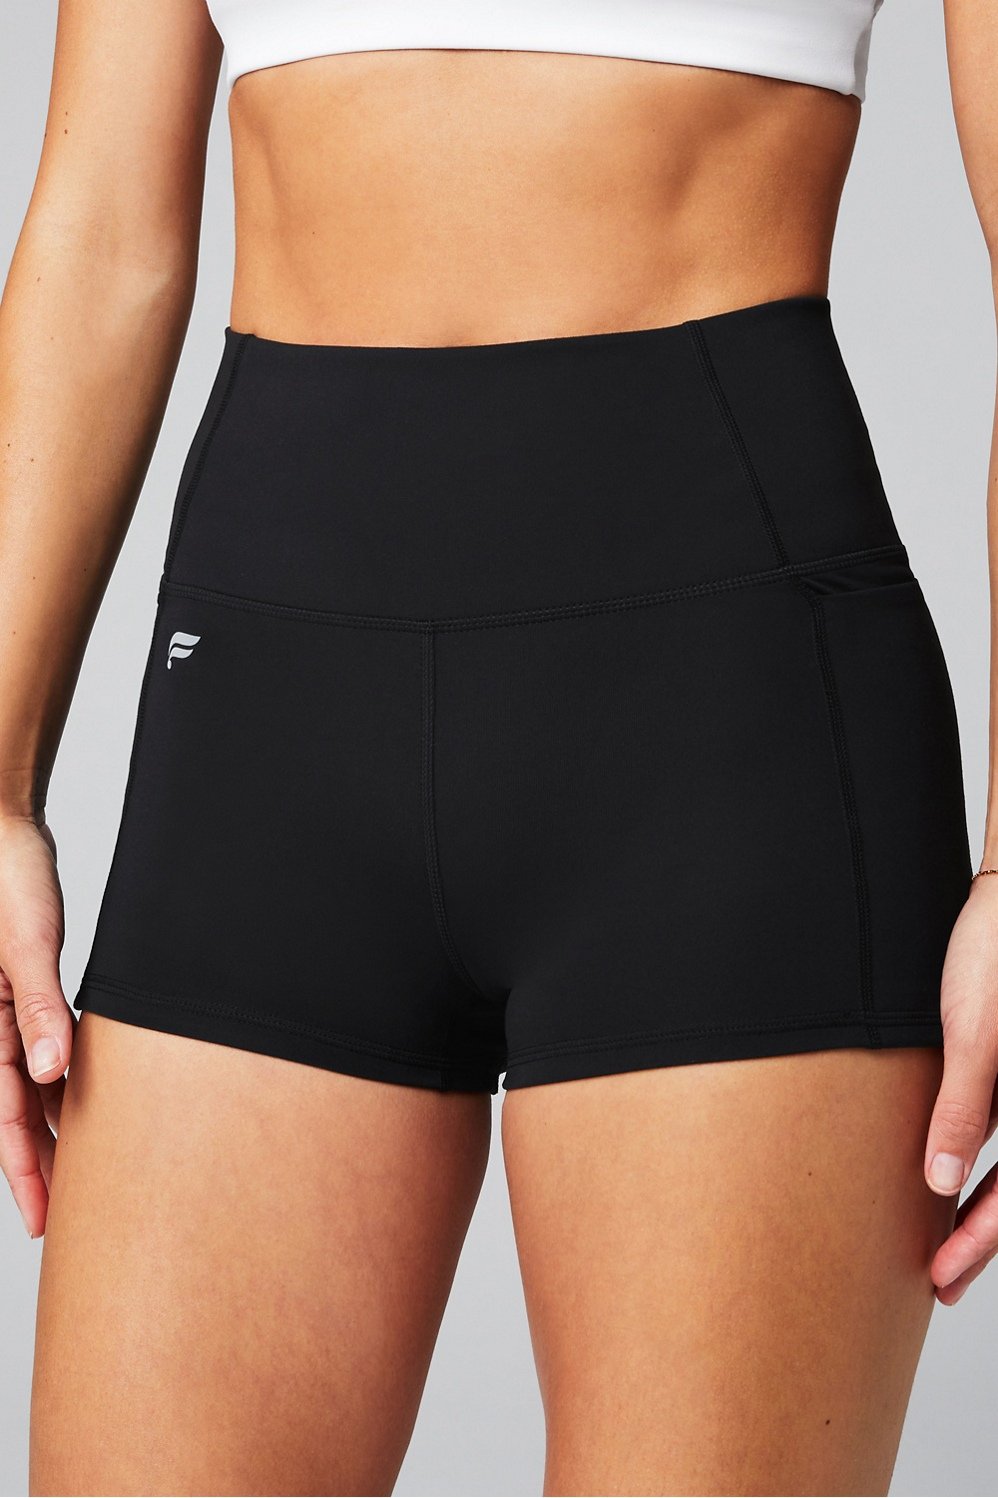 Oasis PureLuxe High-Waisted 2'' Short - Fabletics